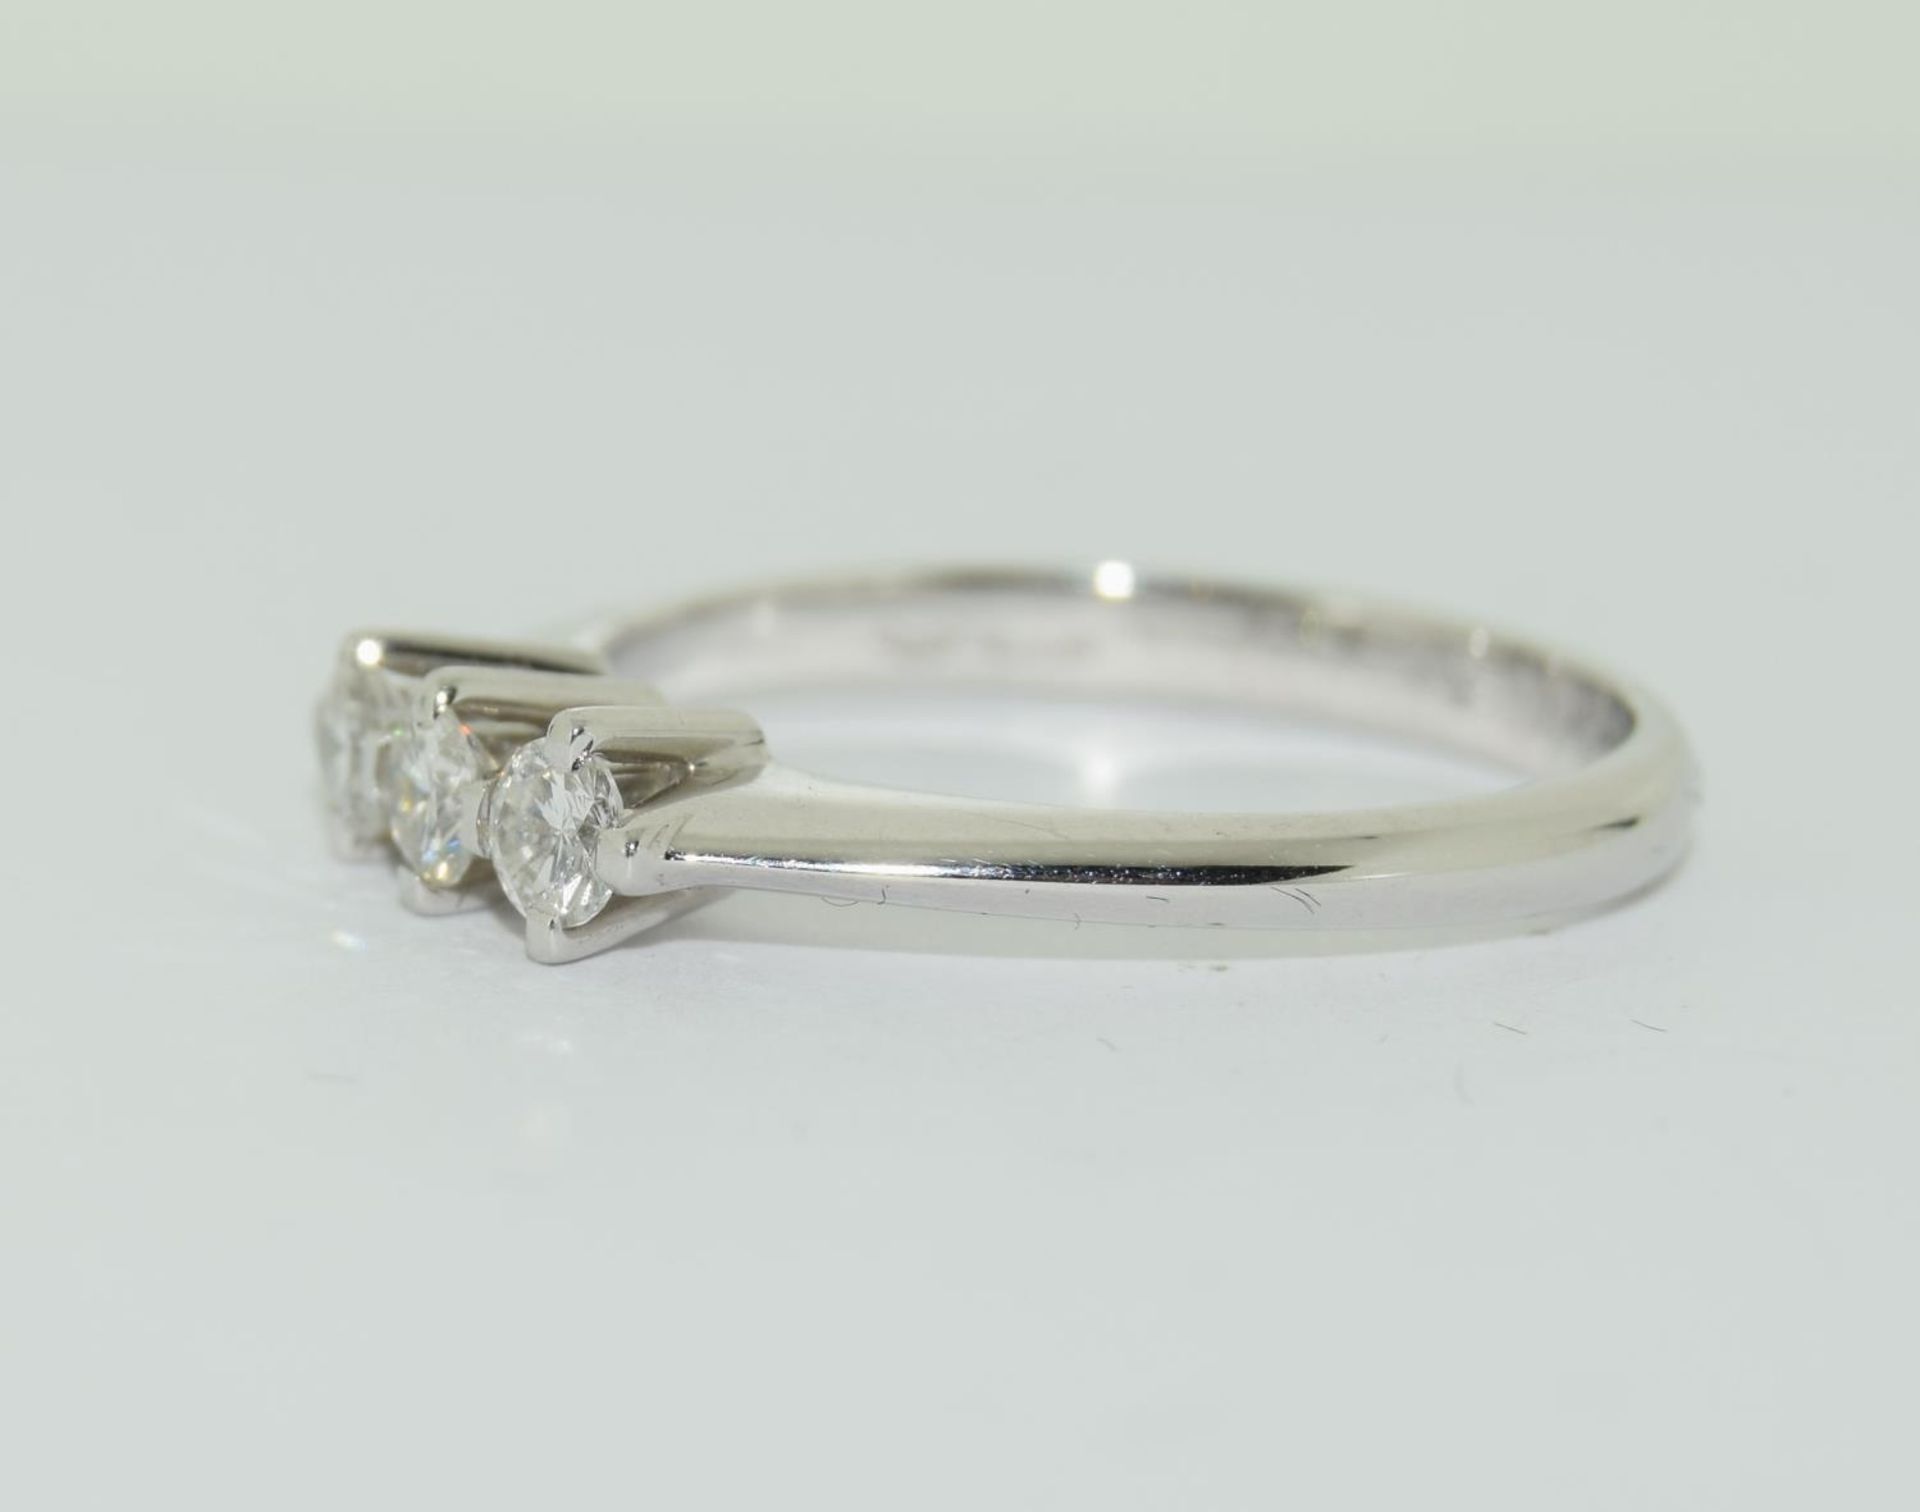 18ct white gold 3 stone diamond bring in 4 claw setting with brilliant stone approx 4.2ct size N - Image 4 of 5